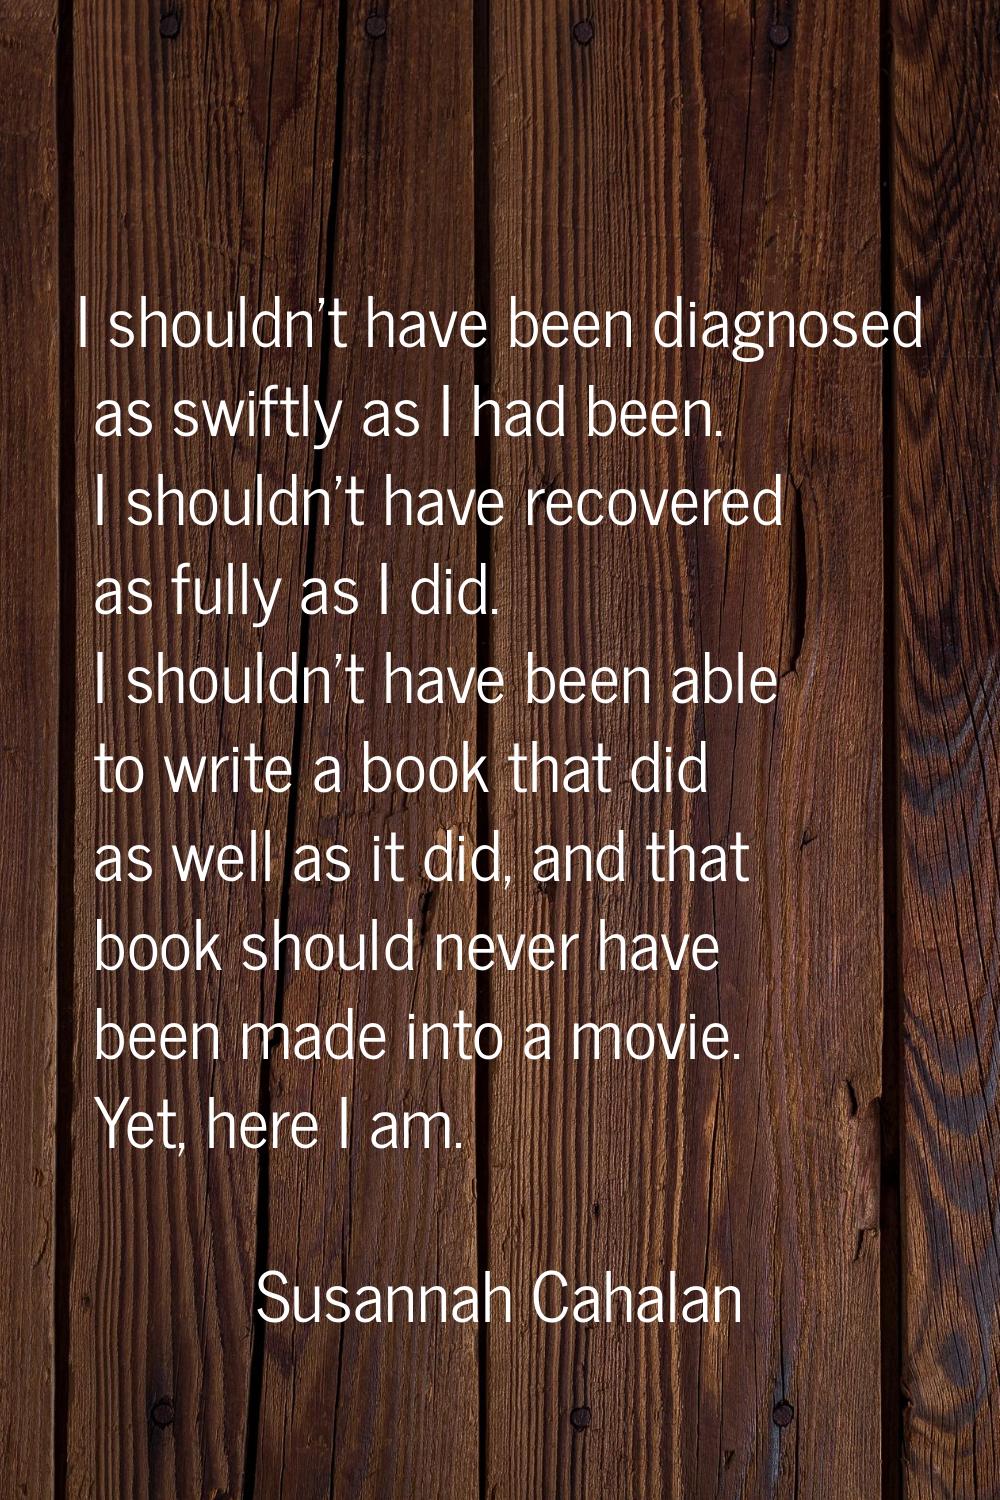 I shouldn't have been diagnosed as swiftly as I had been. I shouldn't have recovered as fully as I 